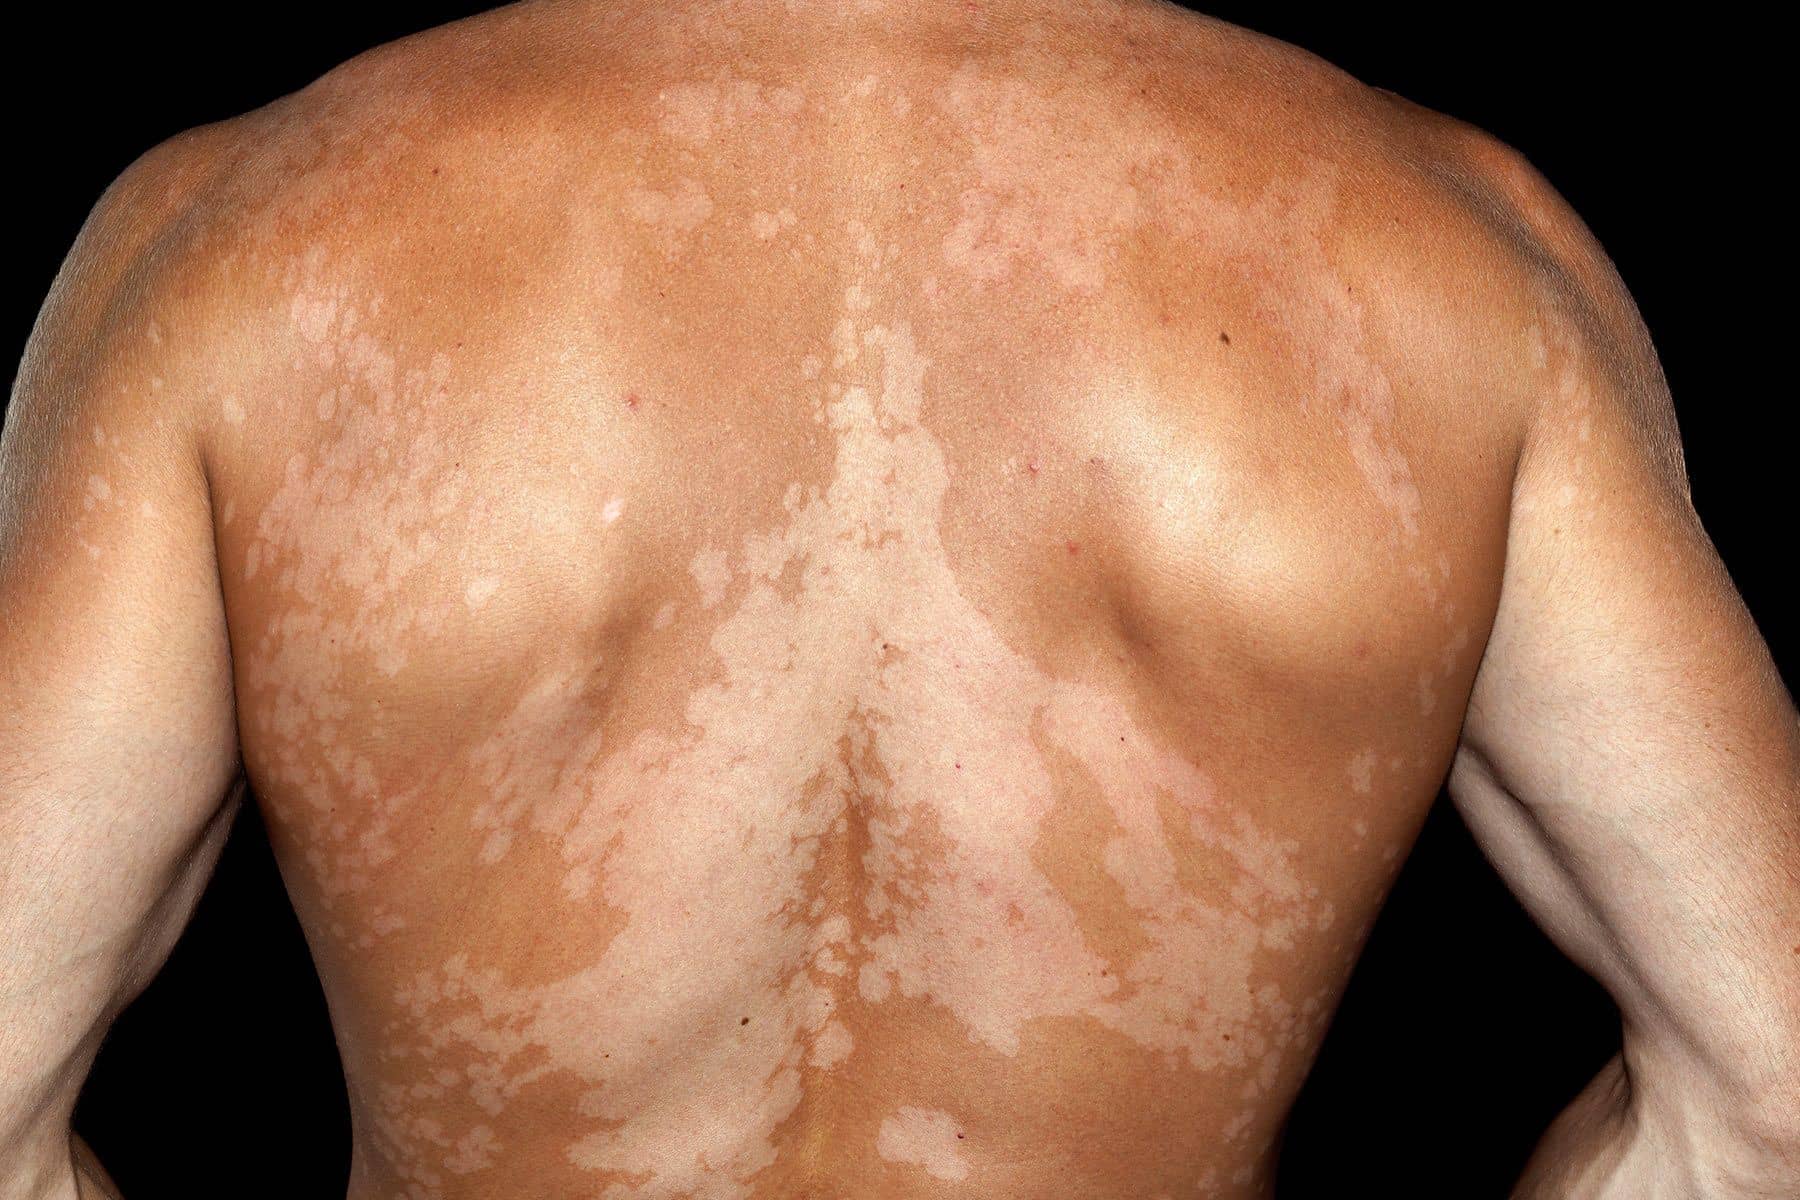 What Are The Common Conditions That White Patches Can Be A Symptom Of?